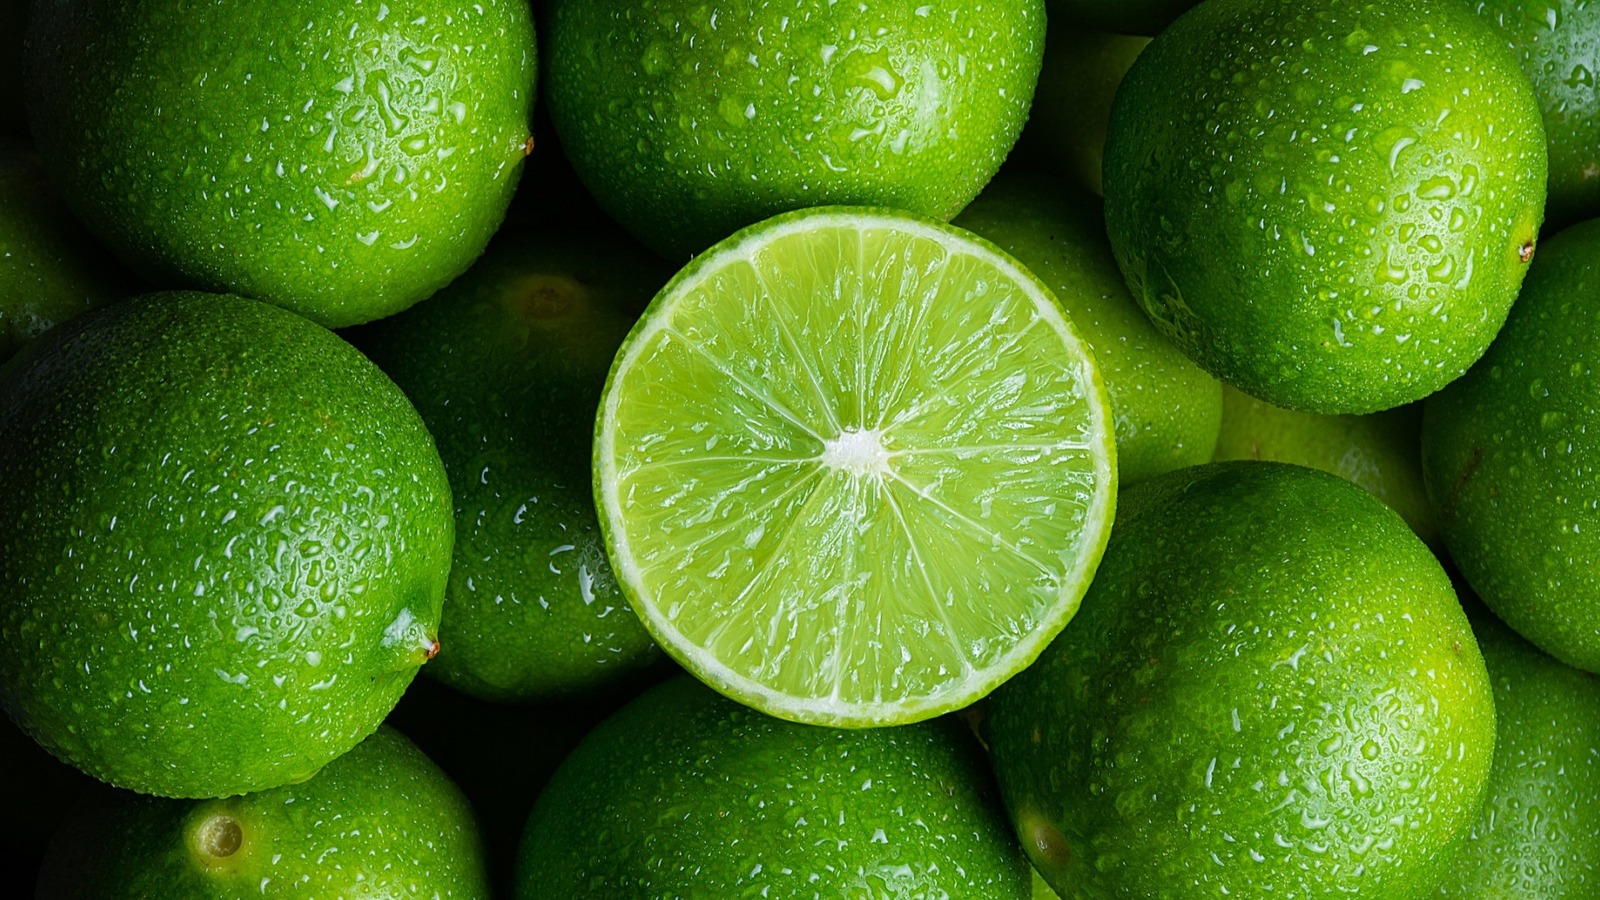 https://www.foodrepublic.com/img/gallery/11-types-of-limes-and-what-makes-them-unique/l-intro-1690475086.jpg